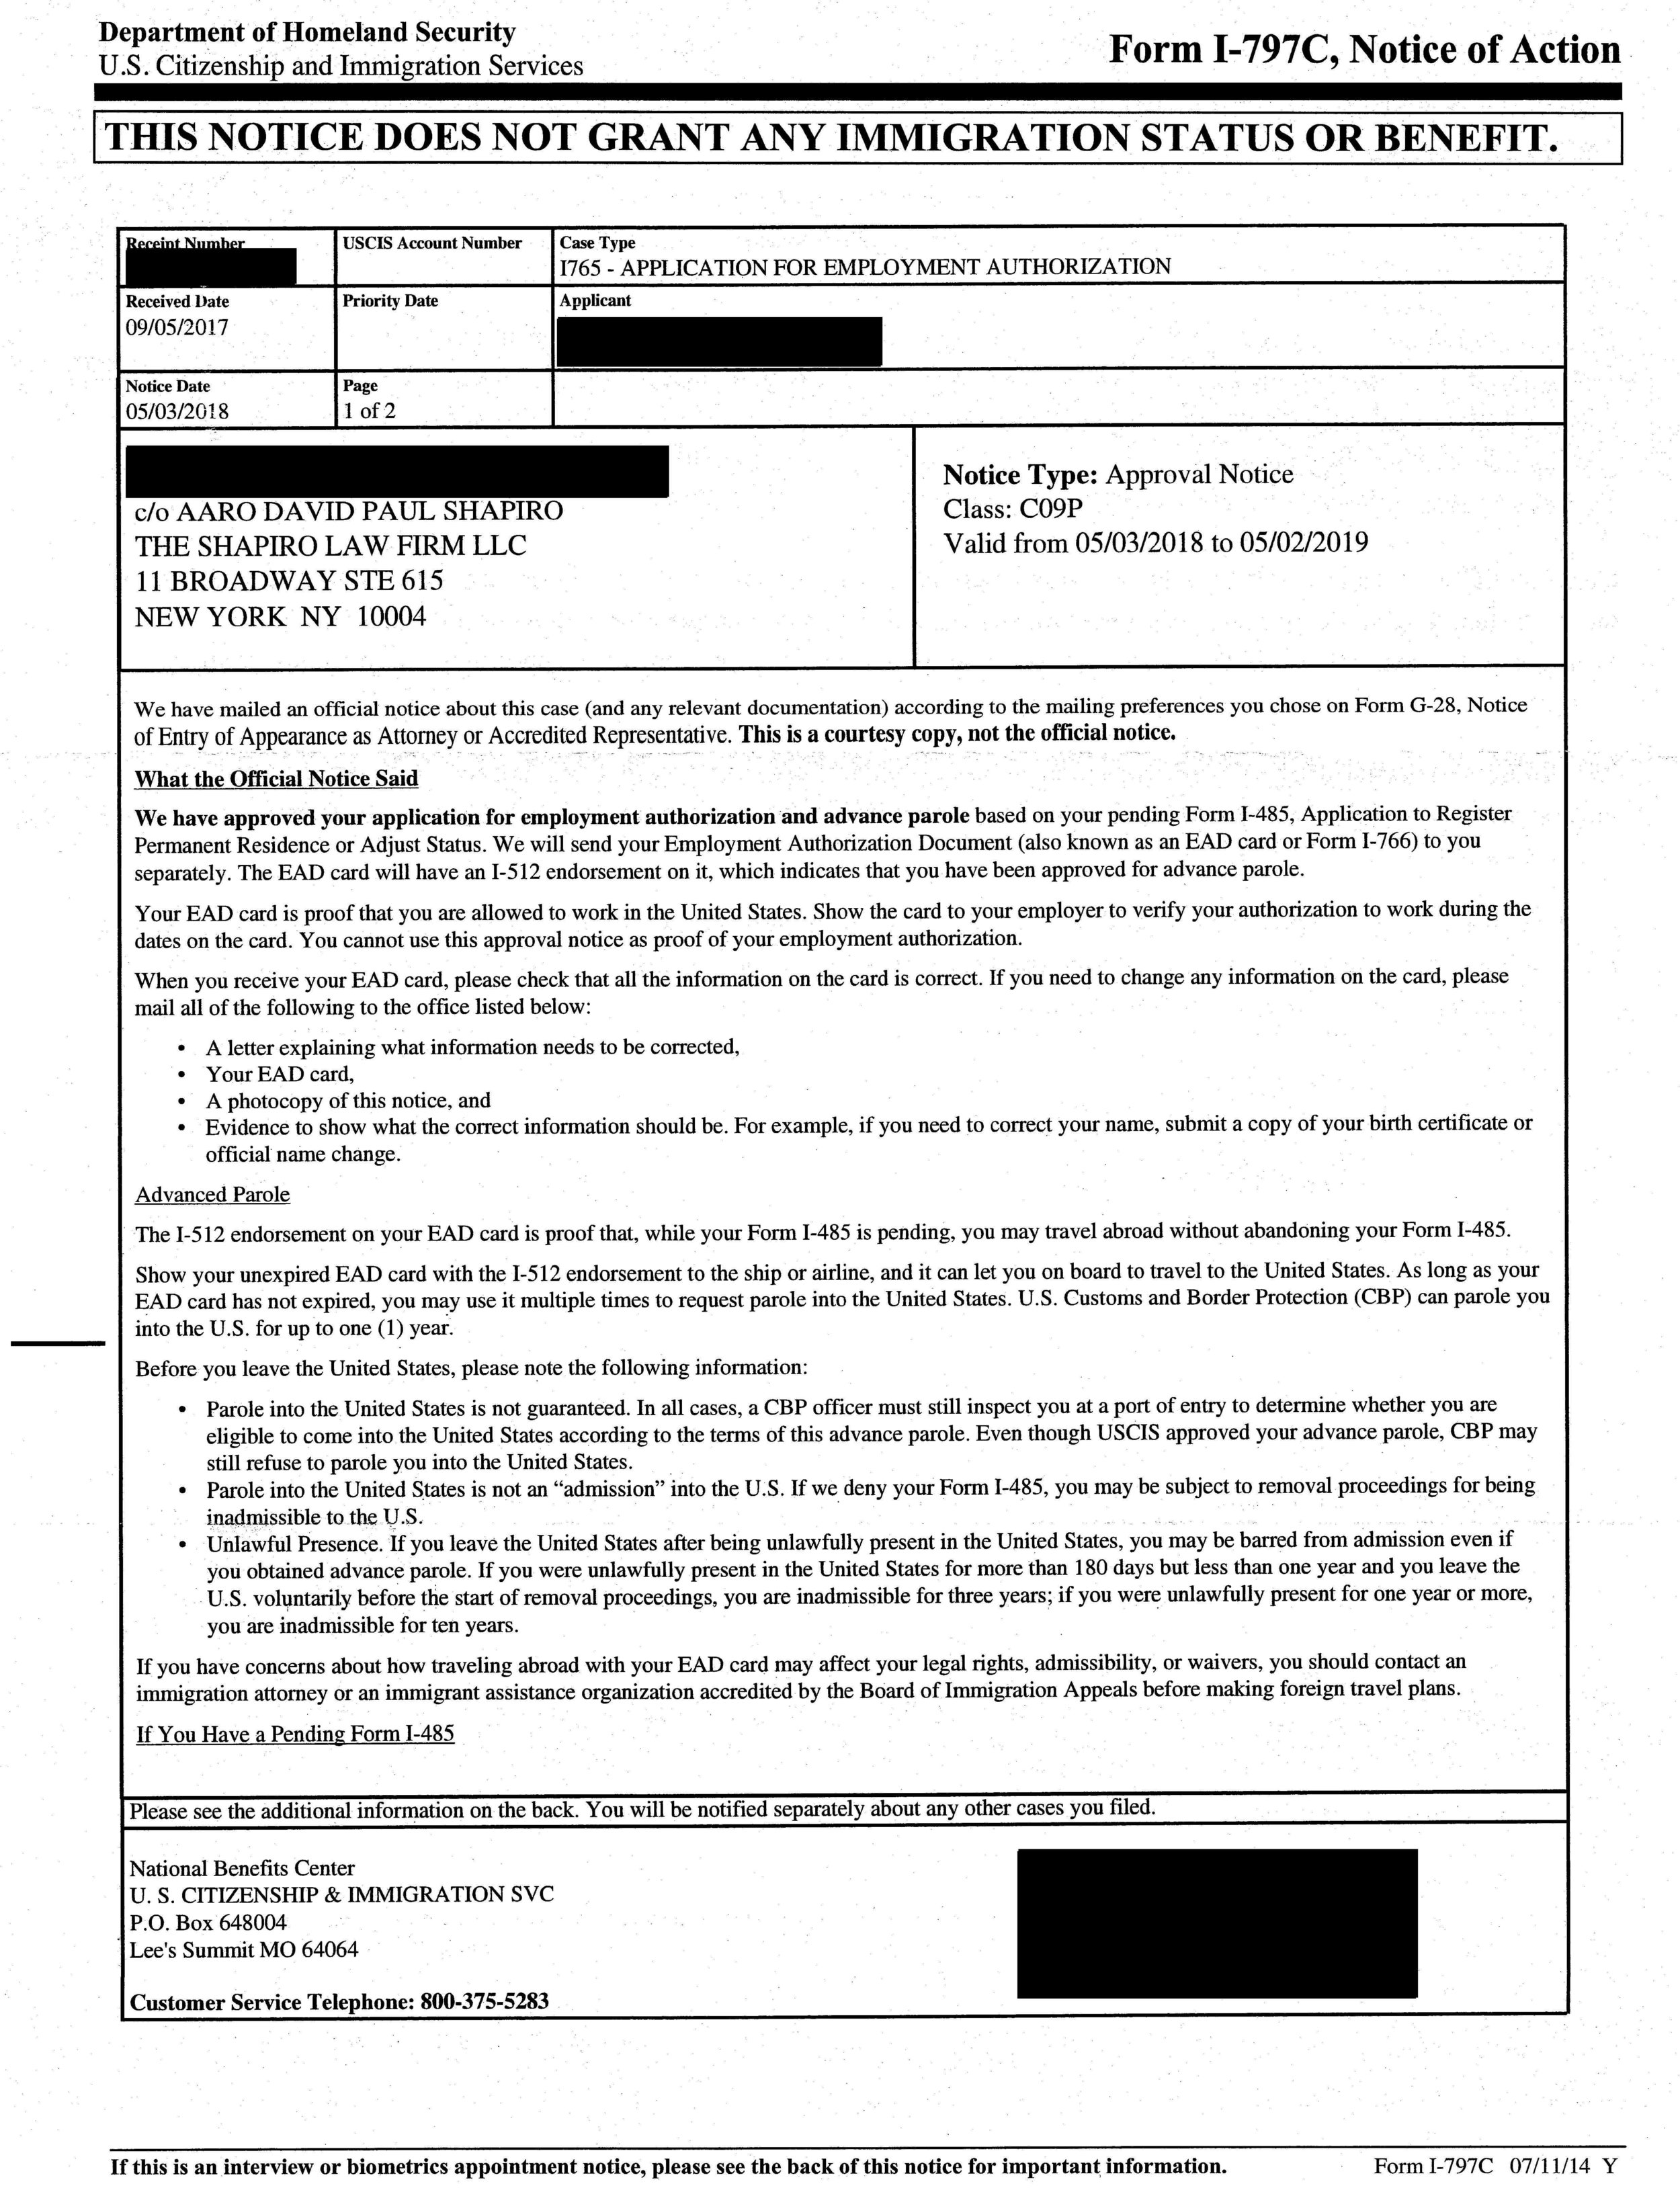 I-797C, Notice of Action - I-765 Approval Notice